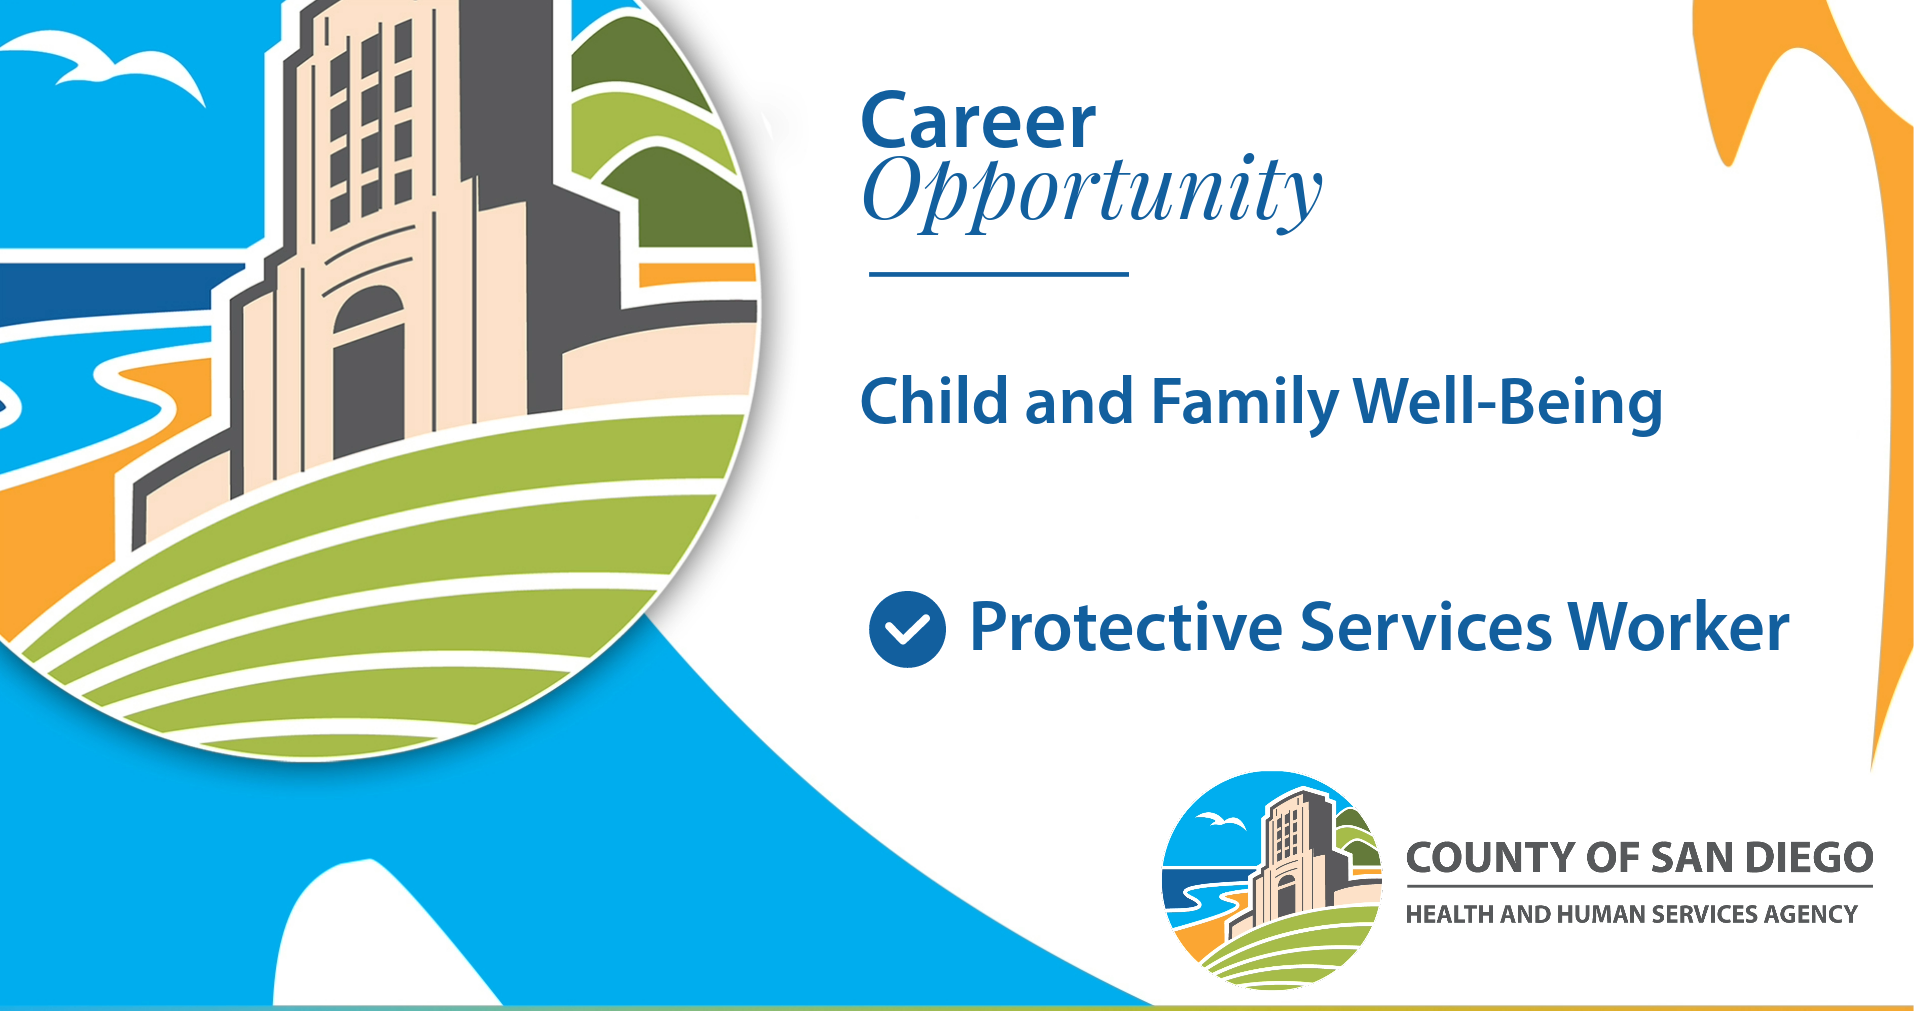 Career Opportunity, Child and Well-Being